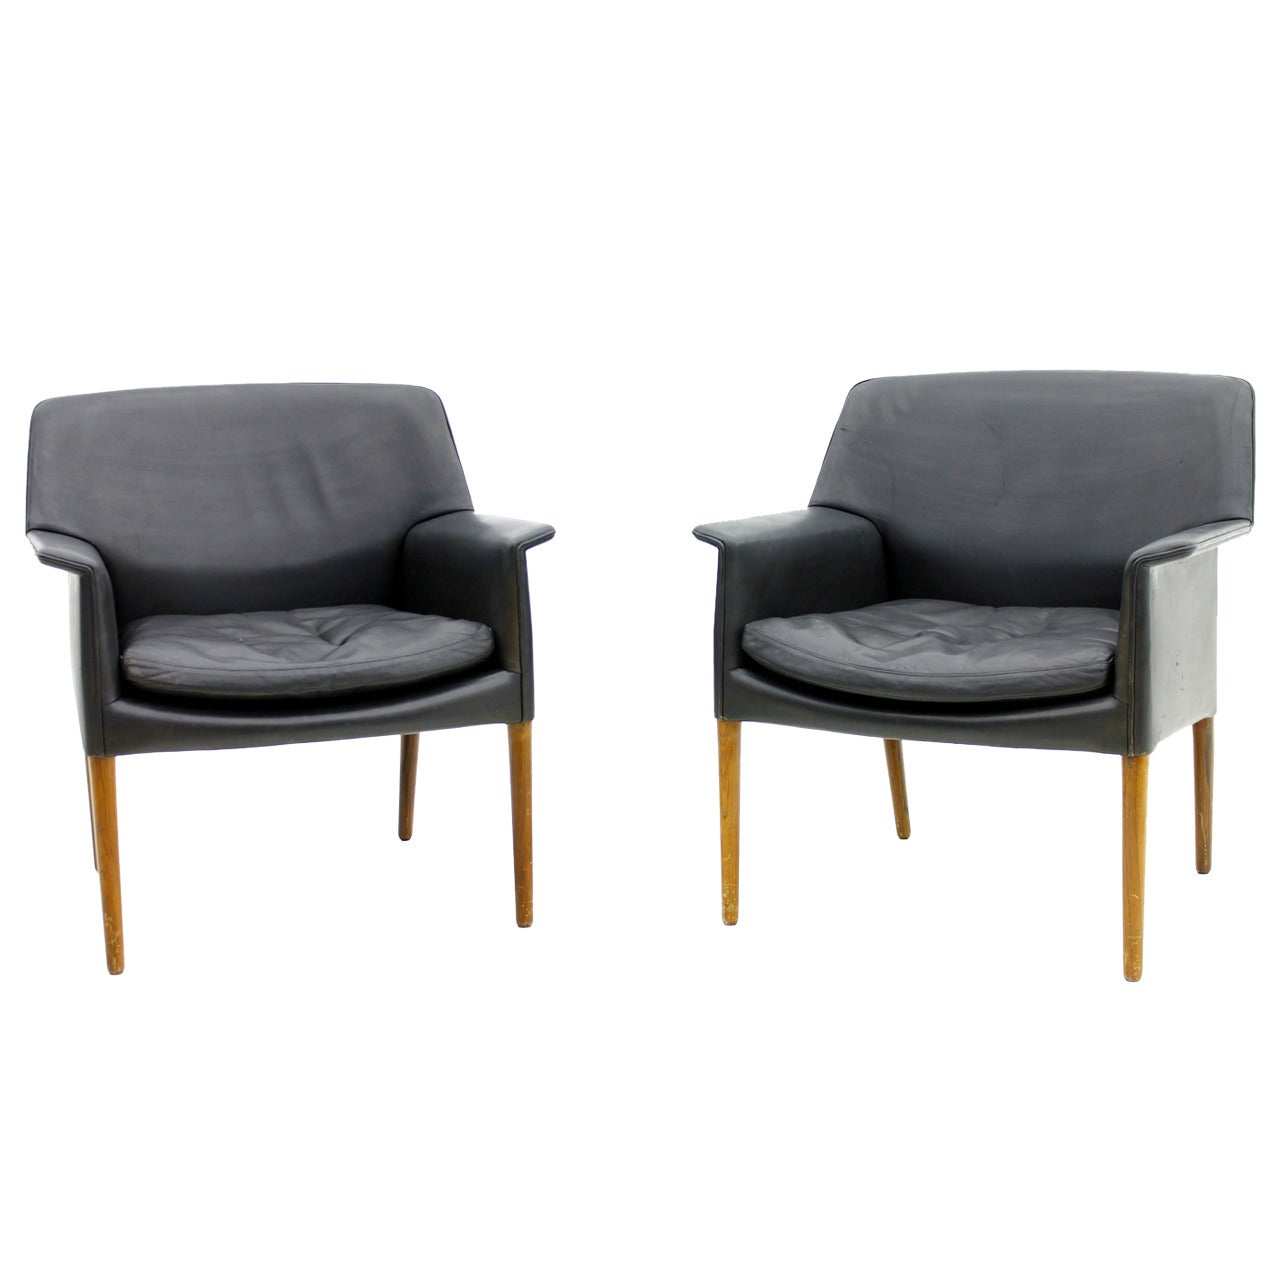 Pair of Danish Leather Lounge Chairs by Ejnar Larsen & Aksel Bender 60s  For Sale